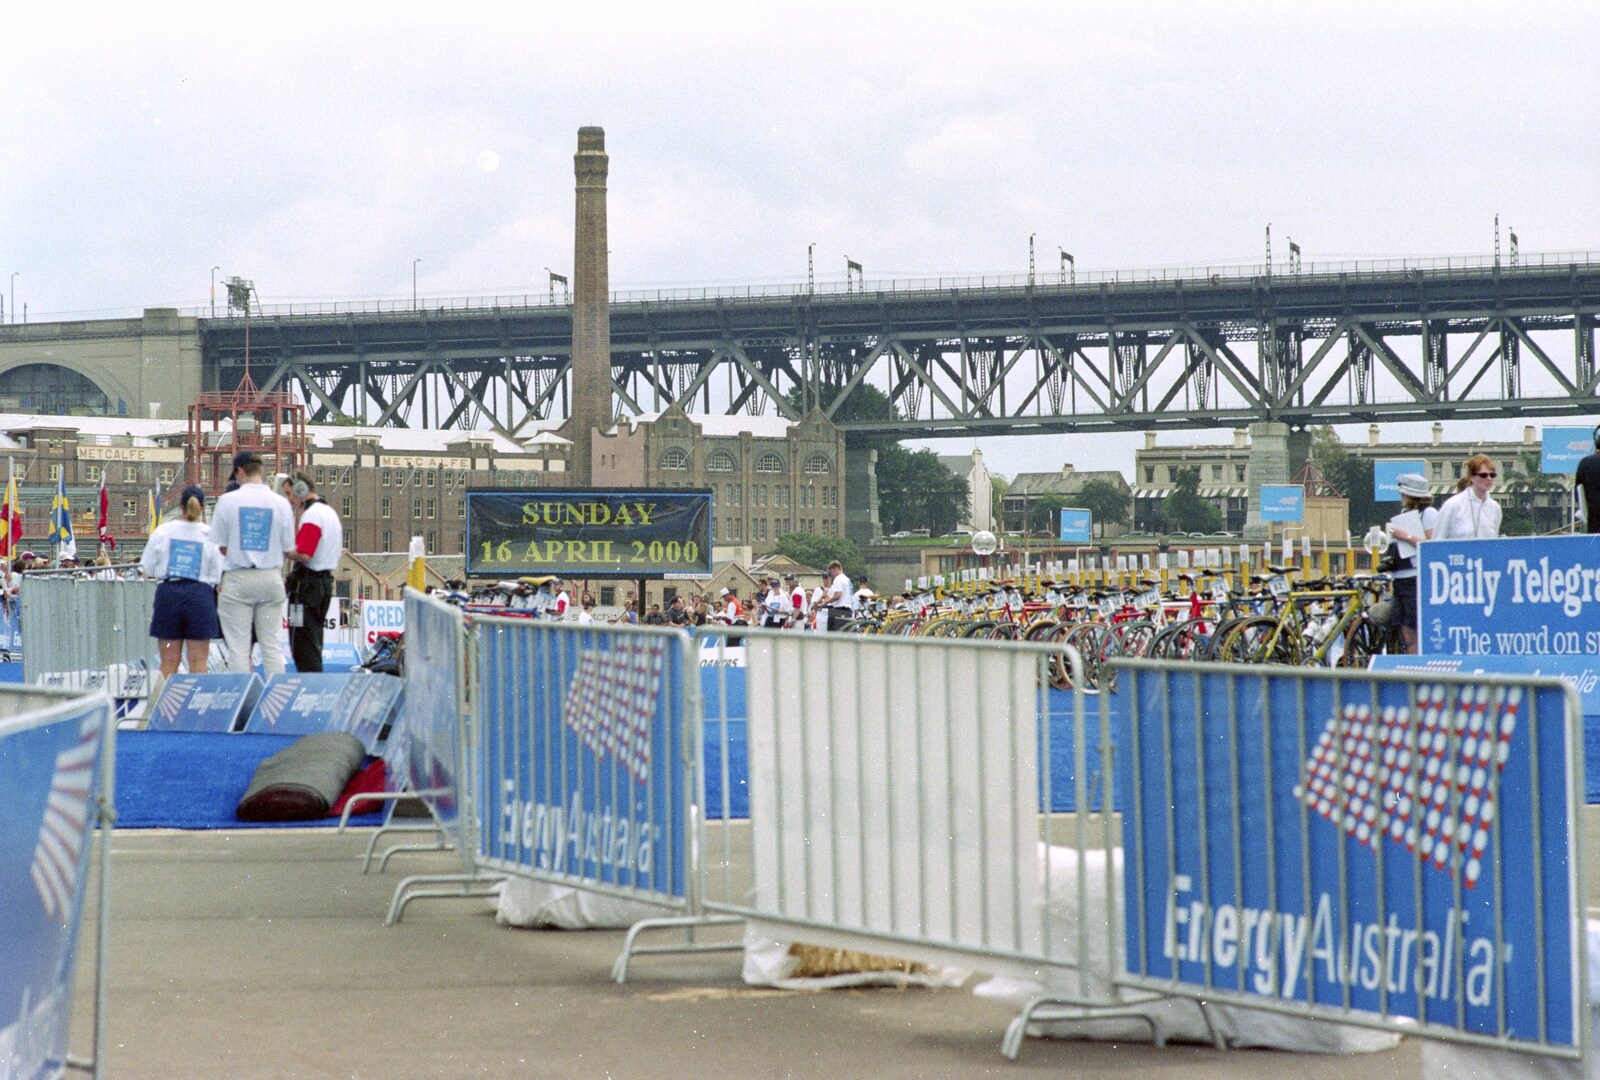 A useful clue as to when things happened from Sydney Triathlon, Sydney, Australia - 16th April 2000